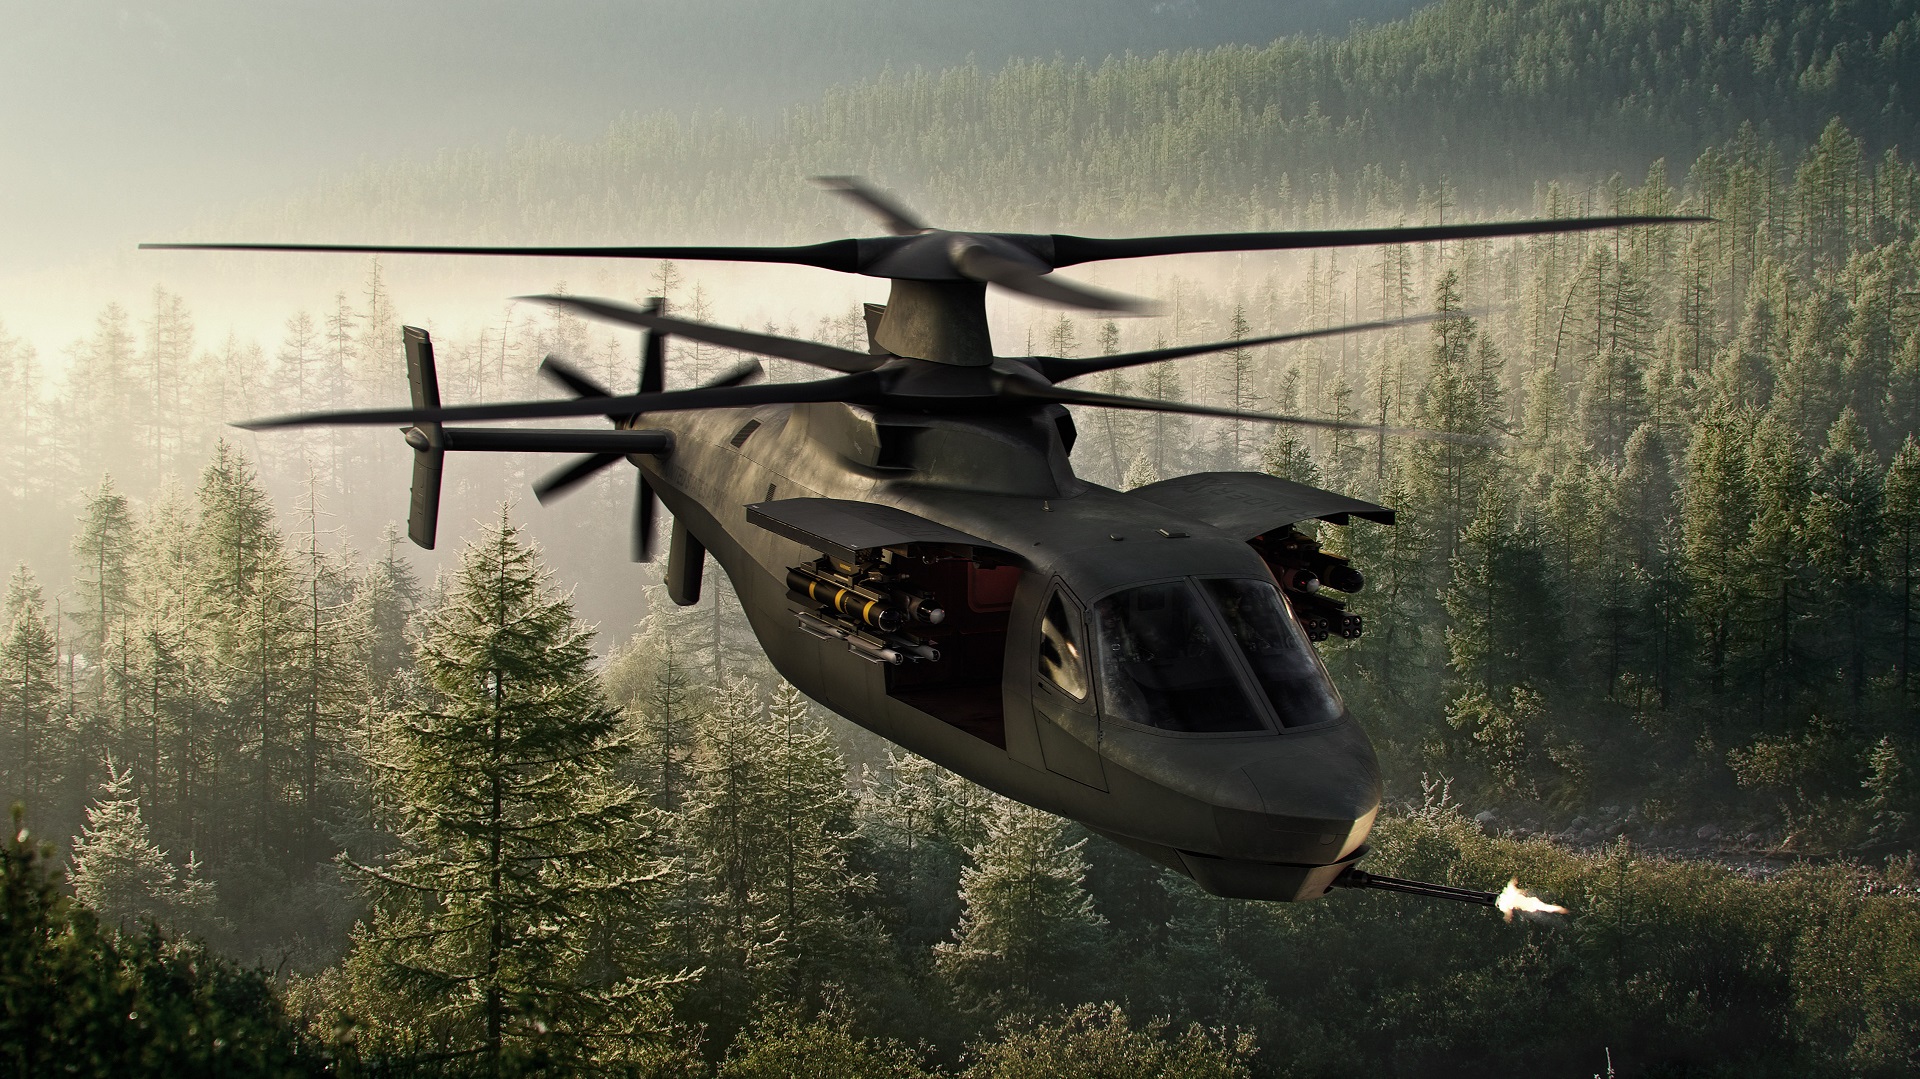 Speed, Maneuverability, Survivability and Sustainability are the Hallmarks of Sikorsky’s X2 Technology